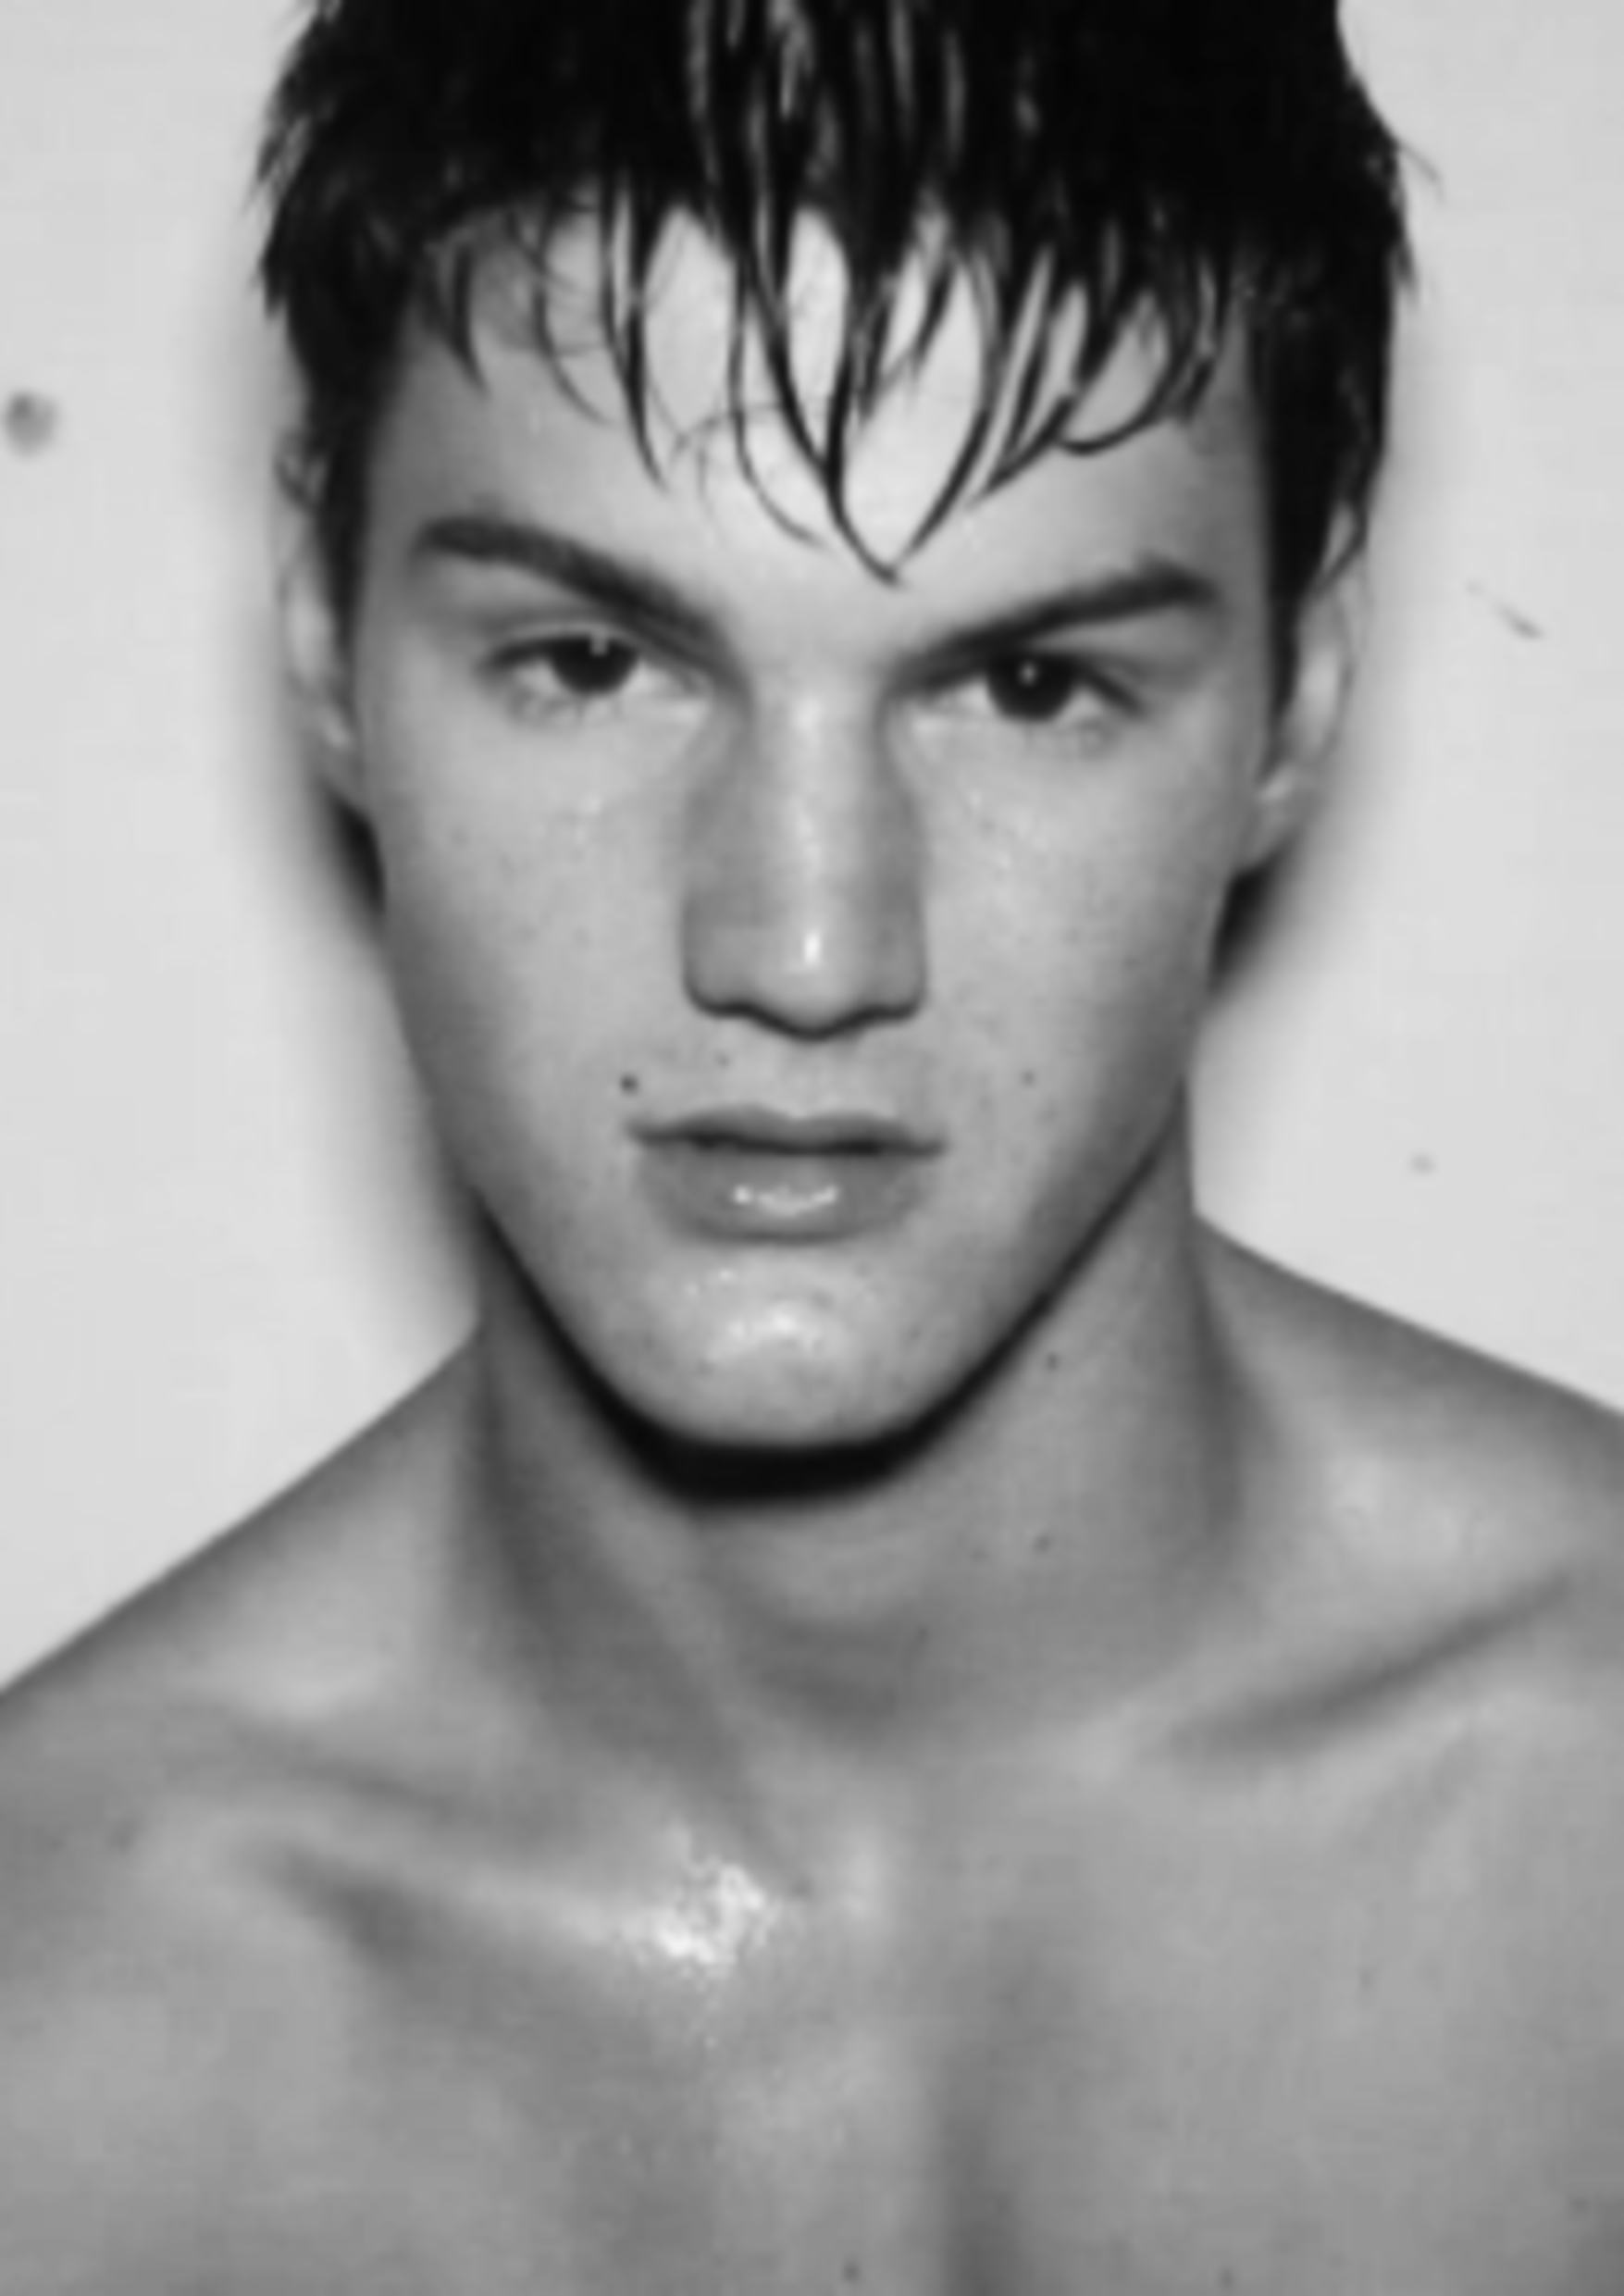 Jacob Files at Primo Management and DT Model Management by Ron Wan in Tai Kok Tsui, Kowloon, Hong Kong.